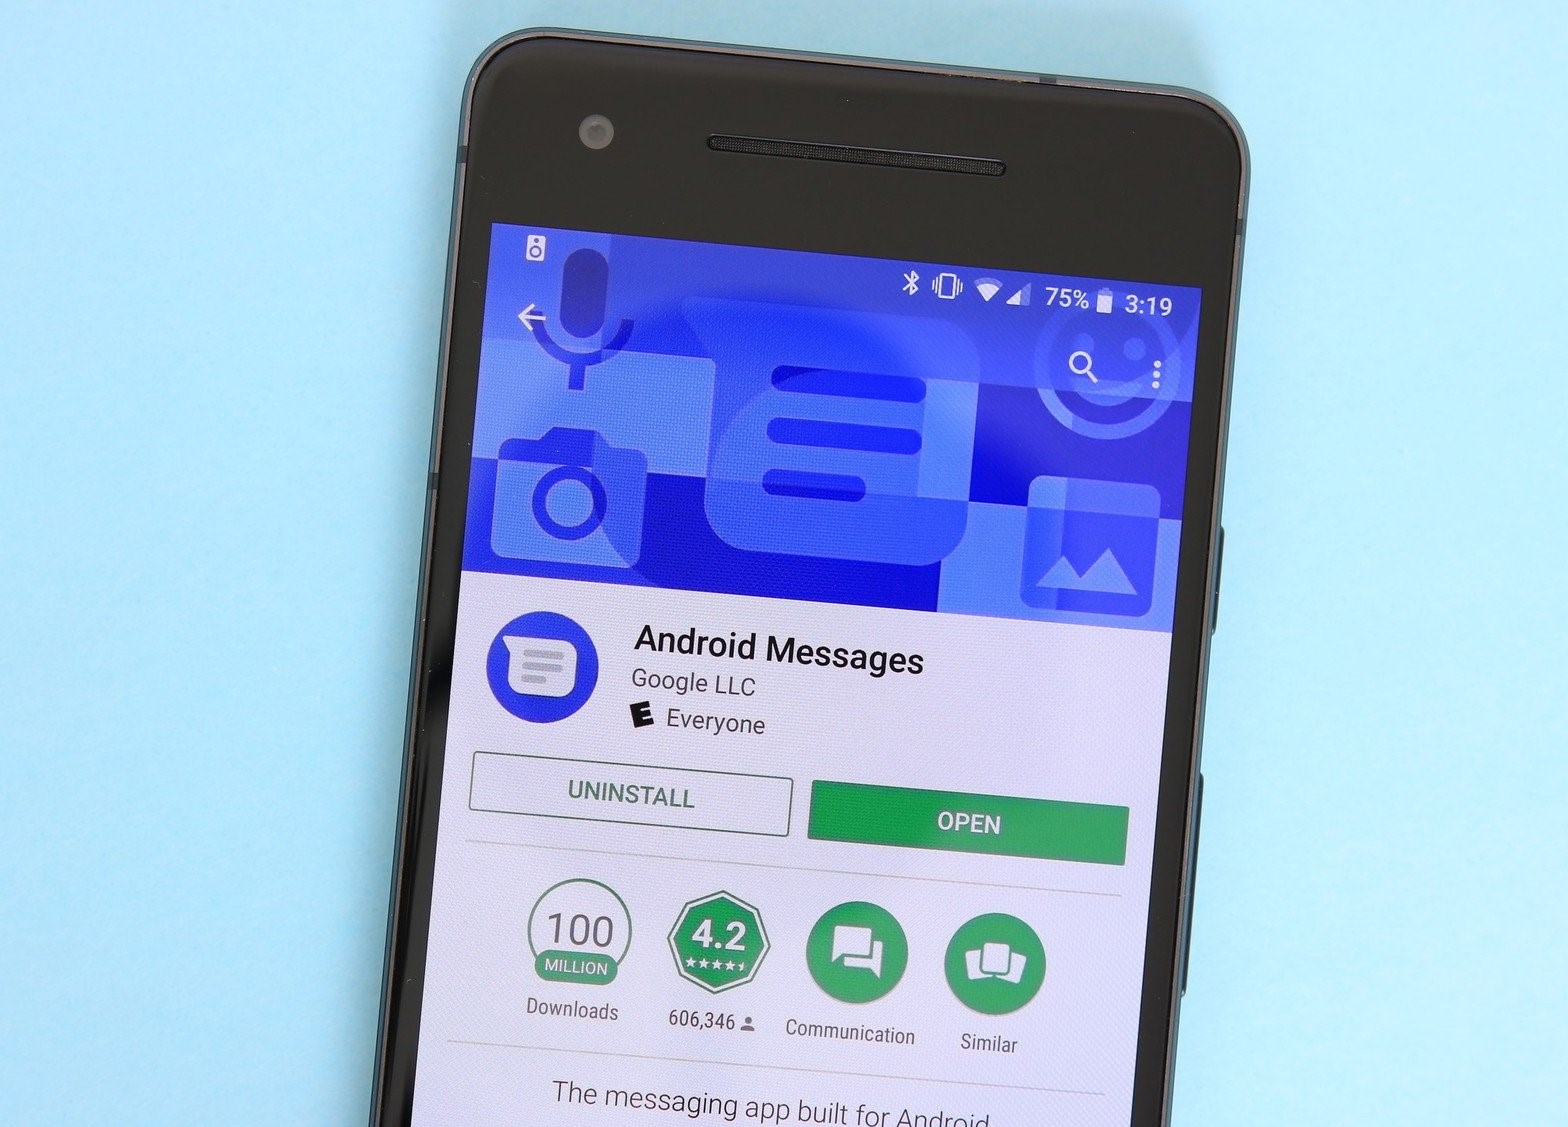 android-messages-pixel-2-play-store.jpg